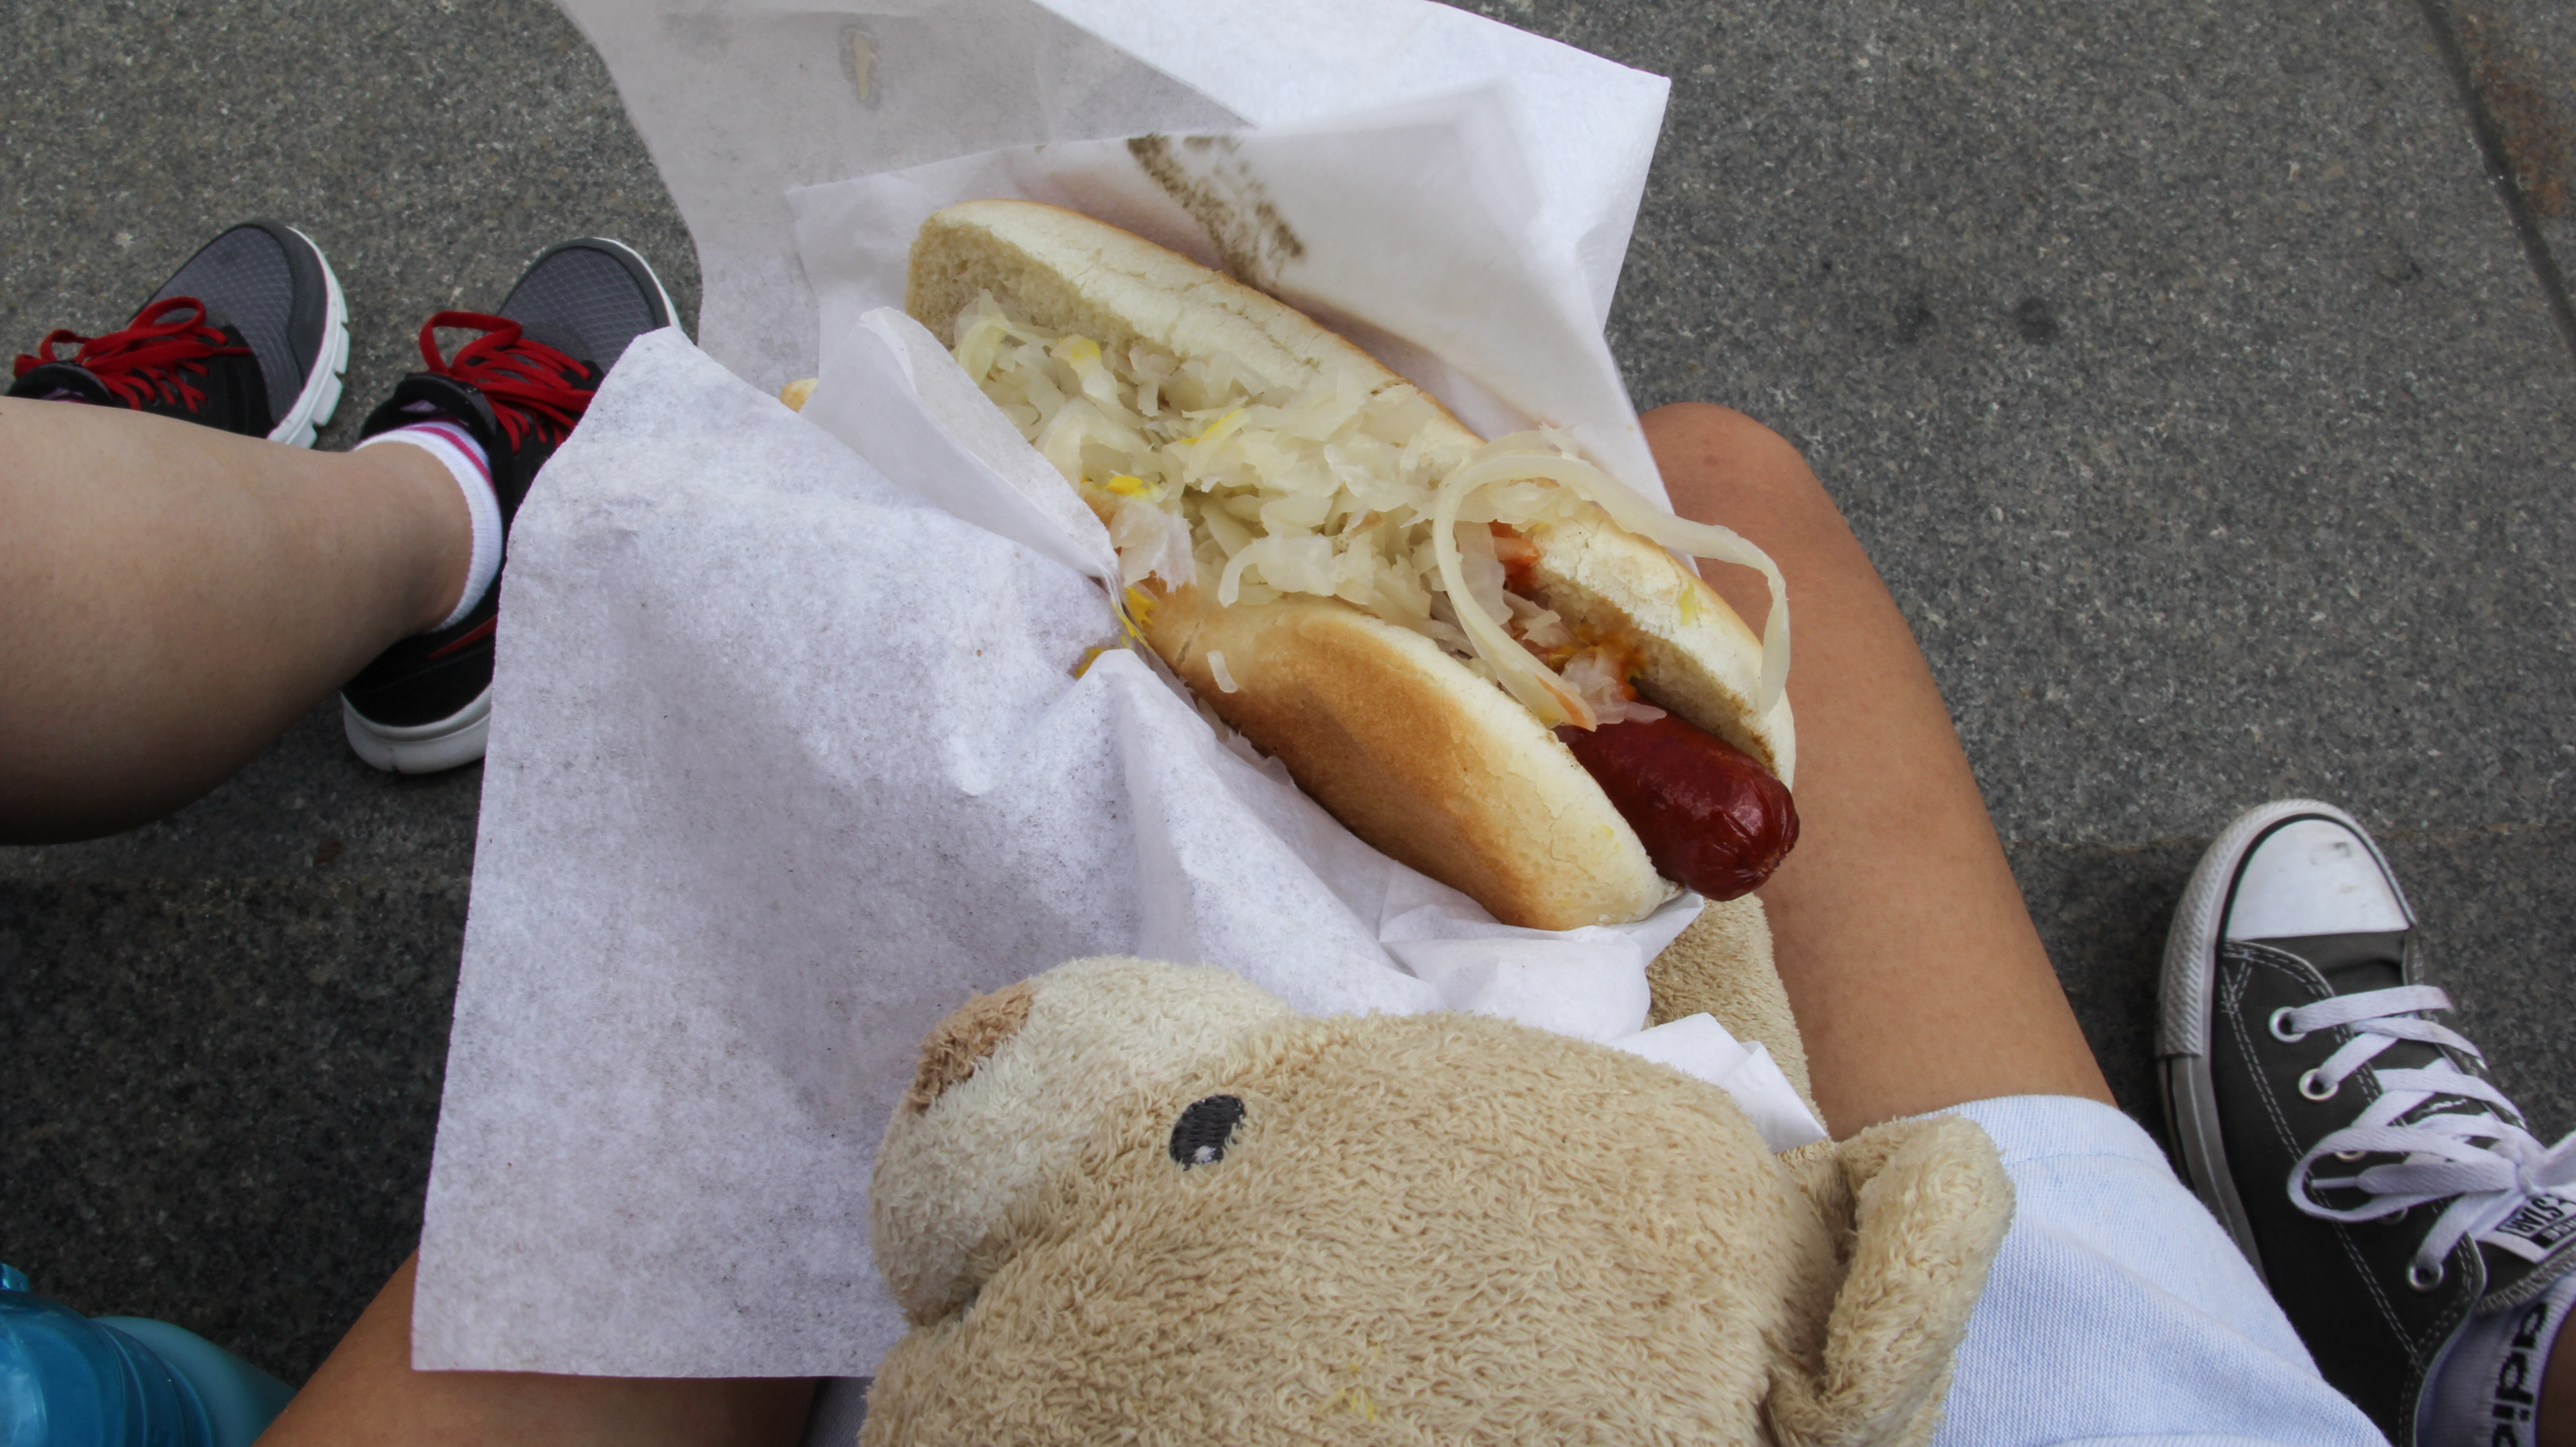 Yummy hot dogs outside the Met.